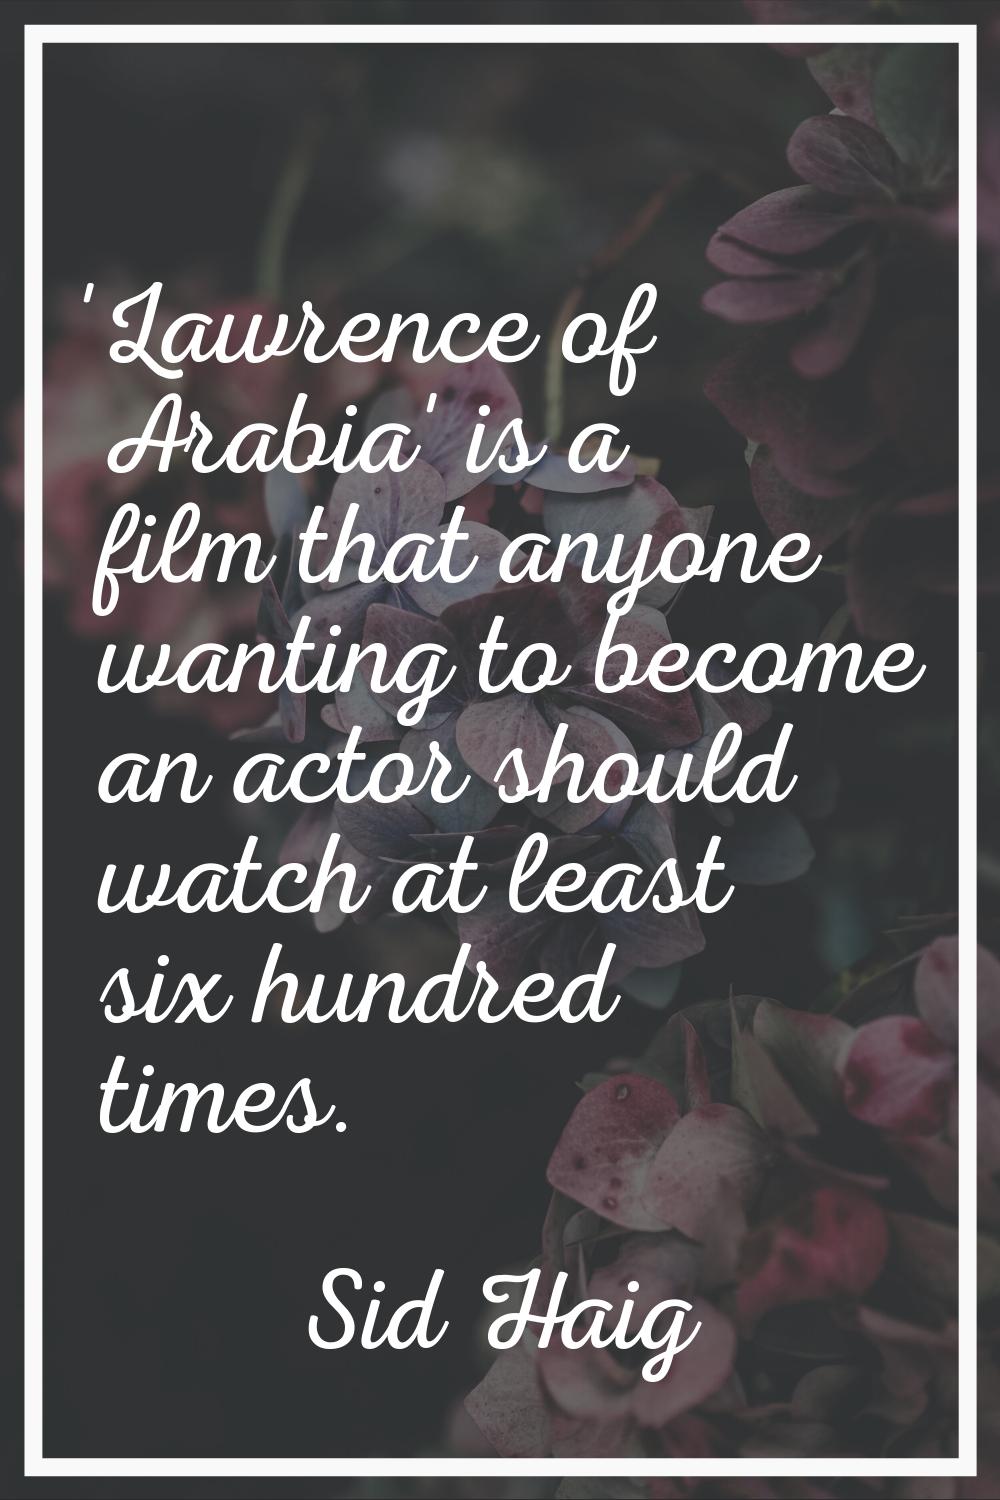 'Lawrence of Arabia' is a film that anyone wanting to become an actor should watch at least six hun